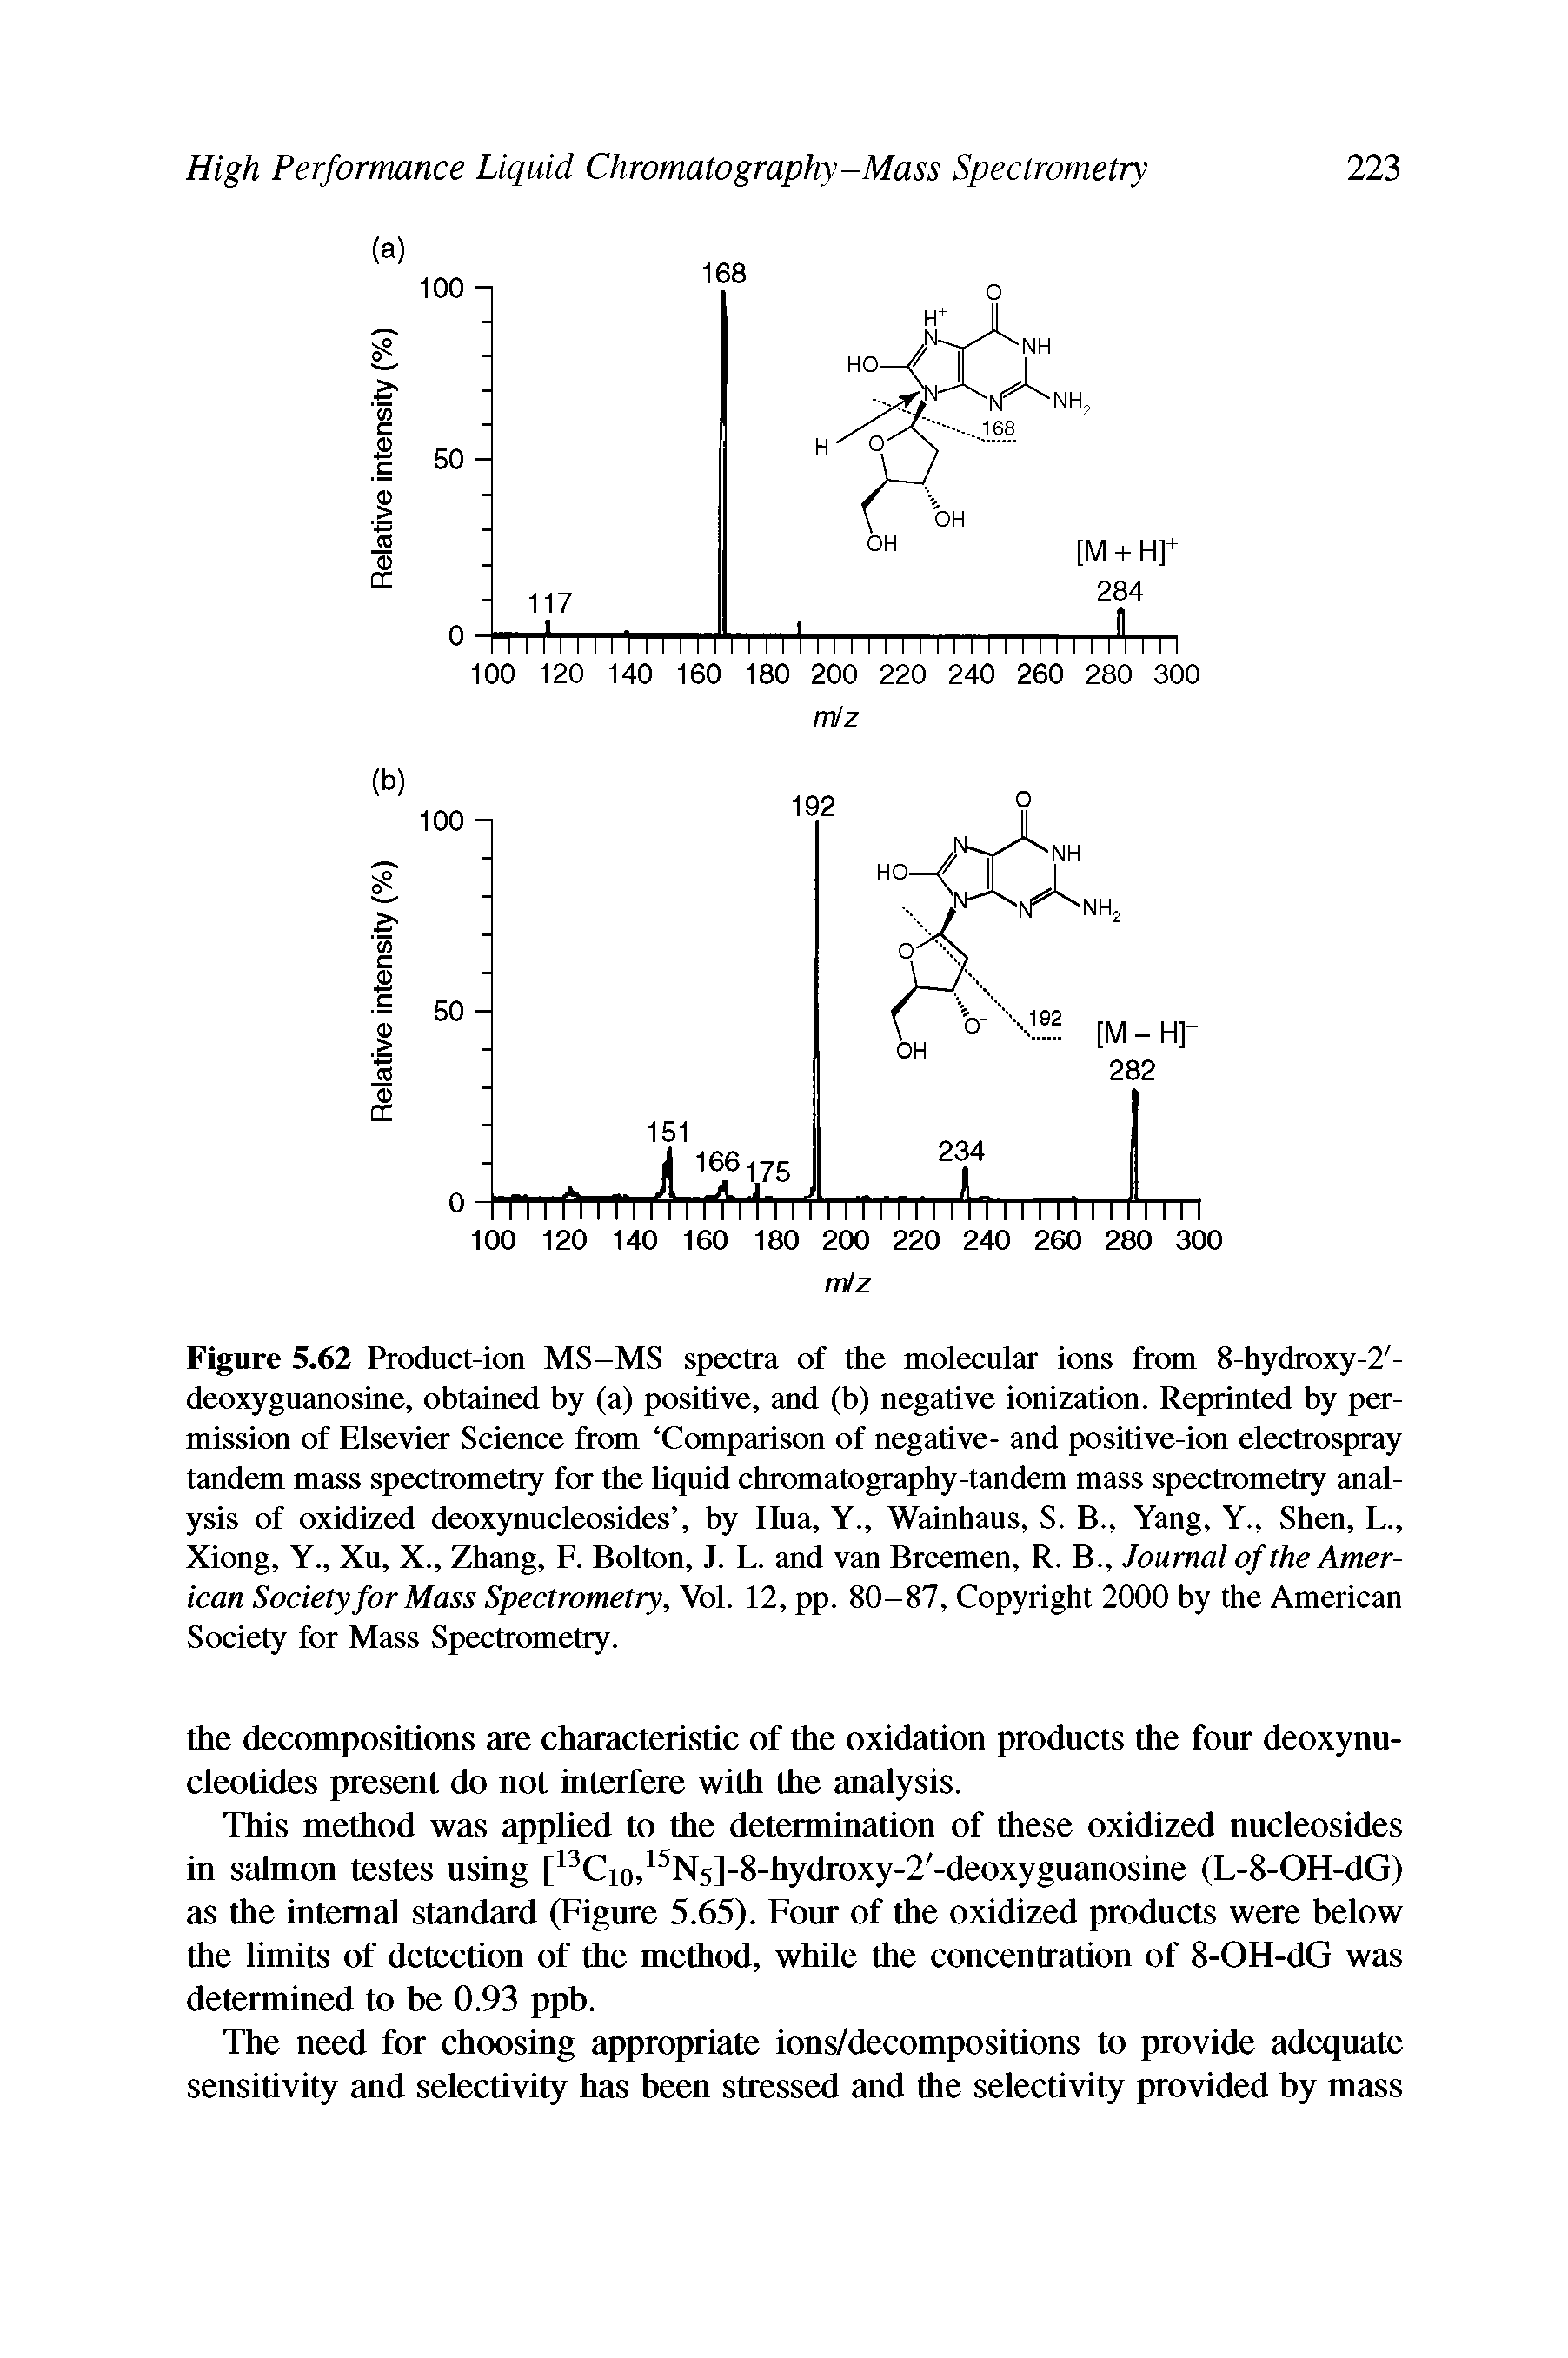 Figure 5.62 Product-ion MS-MS spectra of the molecular ions from 8-hydroxy-2 -deoxyguanosine, obtained by (a) positive, and (b) negative ionization. Reprinted by permission of Elsevier Science from Comparison of negative- and positive-ion electrospray tandem mass spectrometry for the liquid chromatography-tandem mass spectrometry analysis of oxidized deoxynucleosides , by Hua, Y., Wainhaus, S. B., Yang, Y., Shen, L., Xiong, Y., Xu, X., Zhang, F. Bolton, J. L. and van Breemen, R. B., Journal of the American Society for Mass Spectrometry, Vol. 12, pp. 80-87, Copyright 2000 by the American Society for Mass Spectrometry.